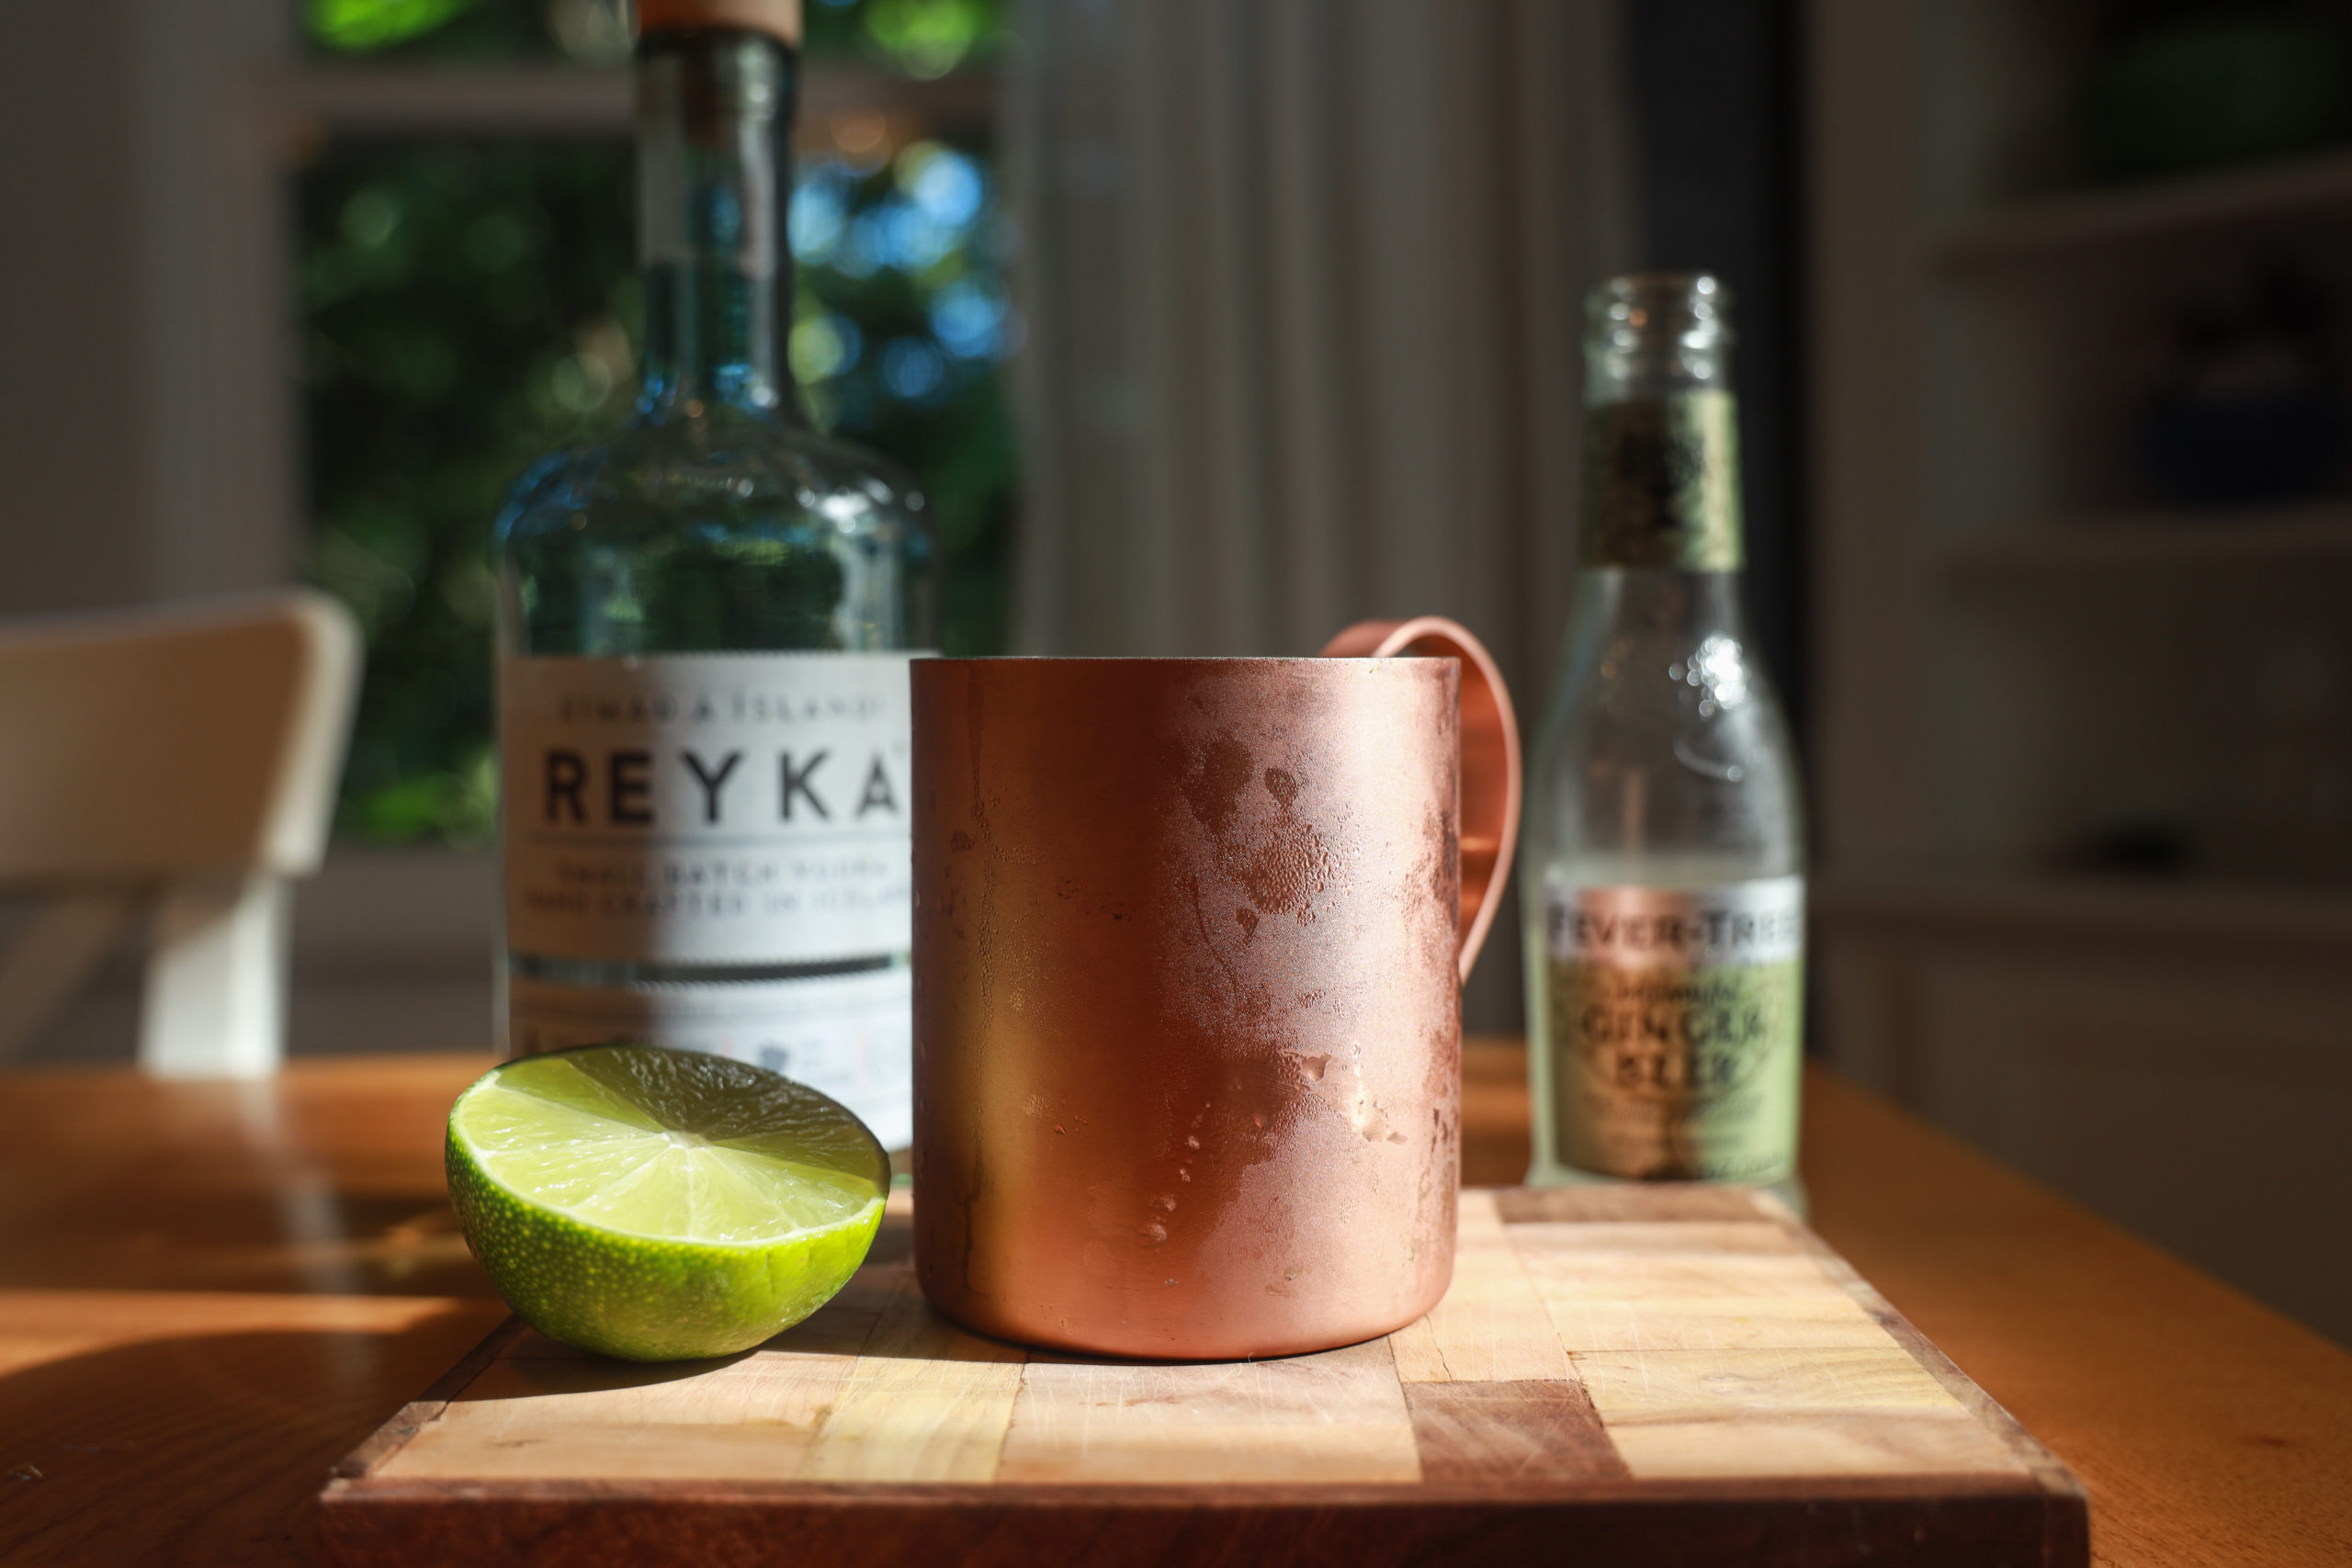 Moscow Mule cocktail in a copper mug with Reyka vodka and Fever Tree ginger beer.